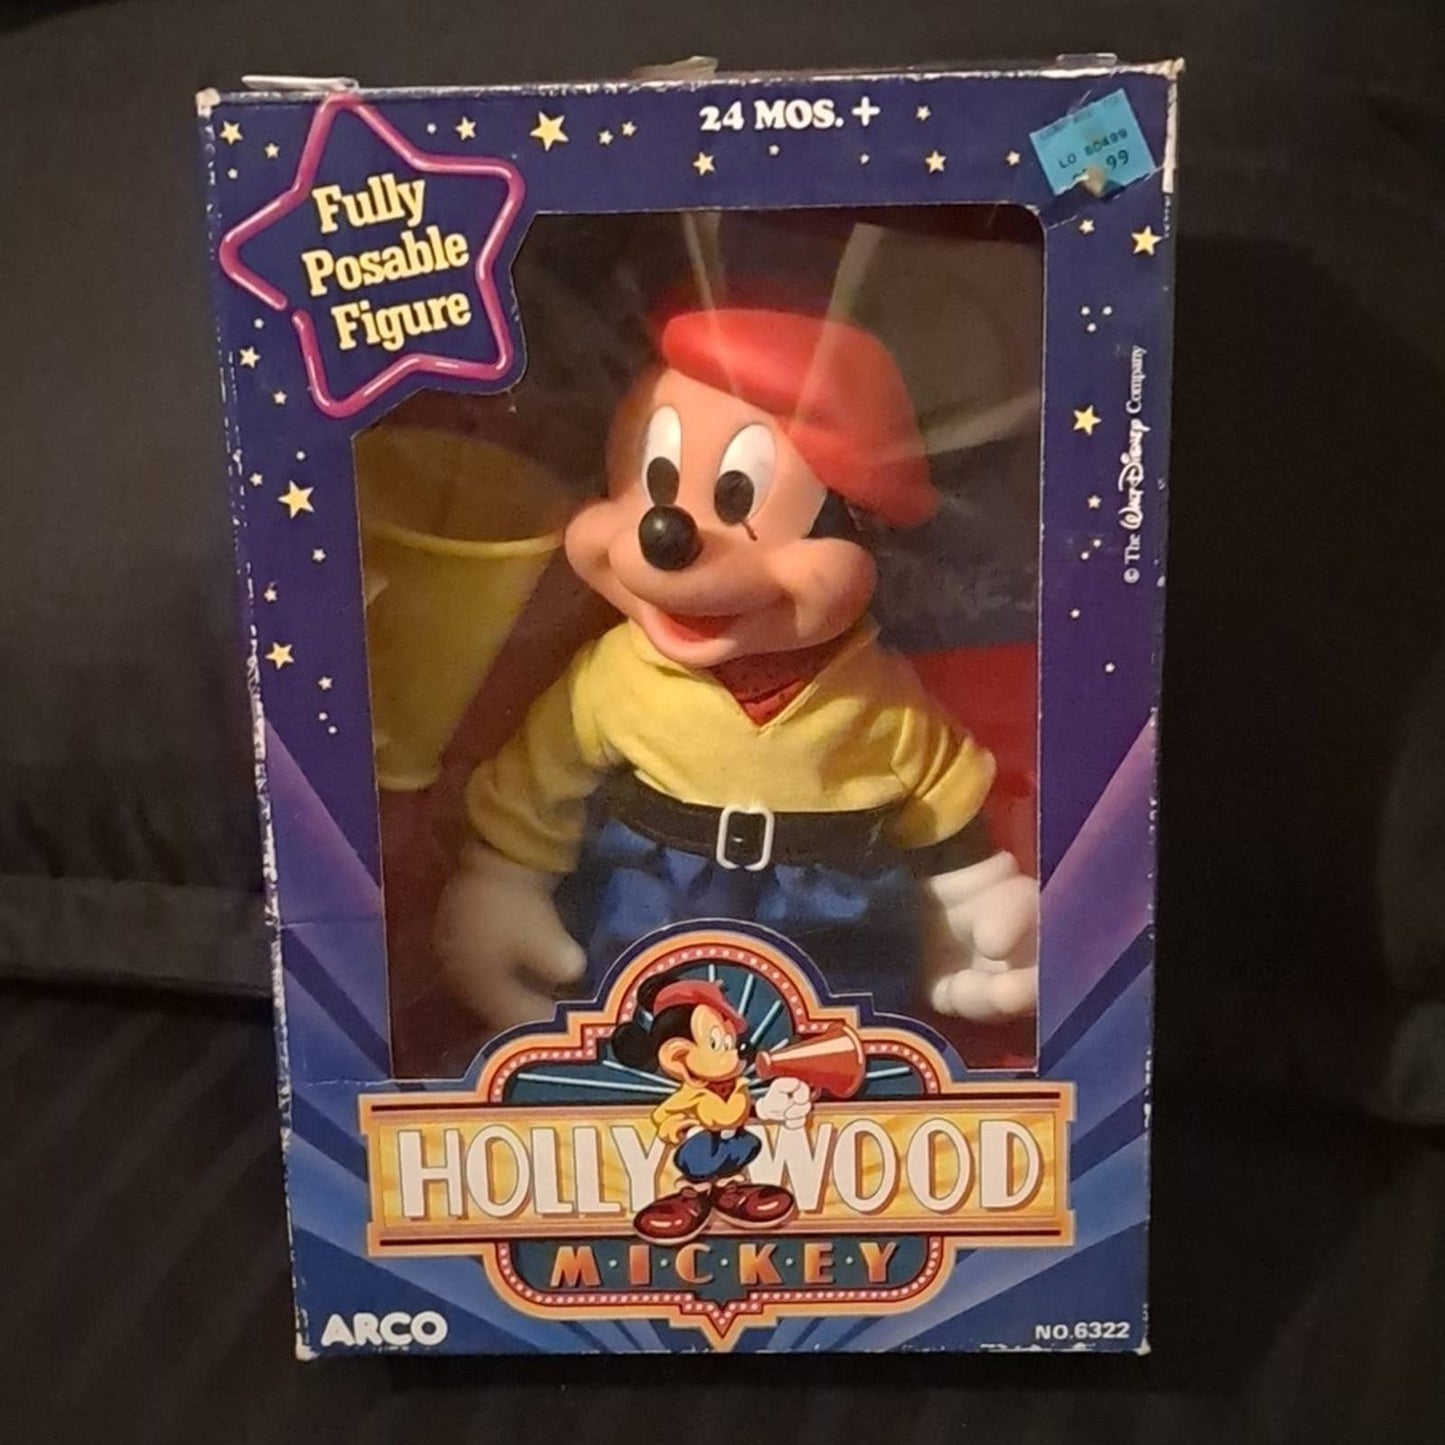 Hollywood Mickey Mouse Fully Posable Figurine in box